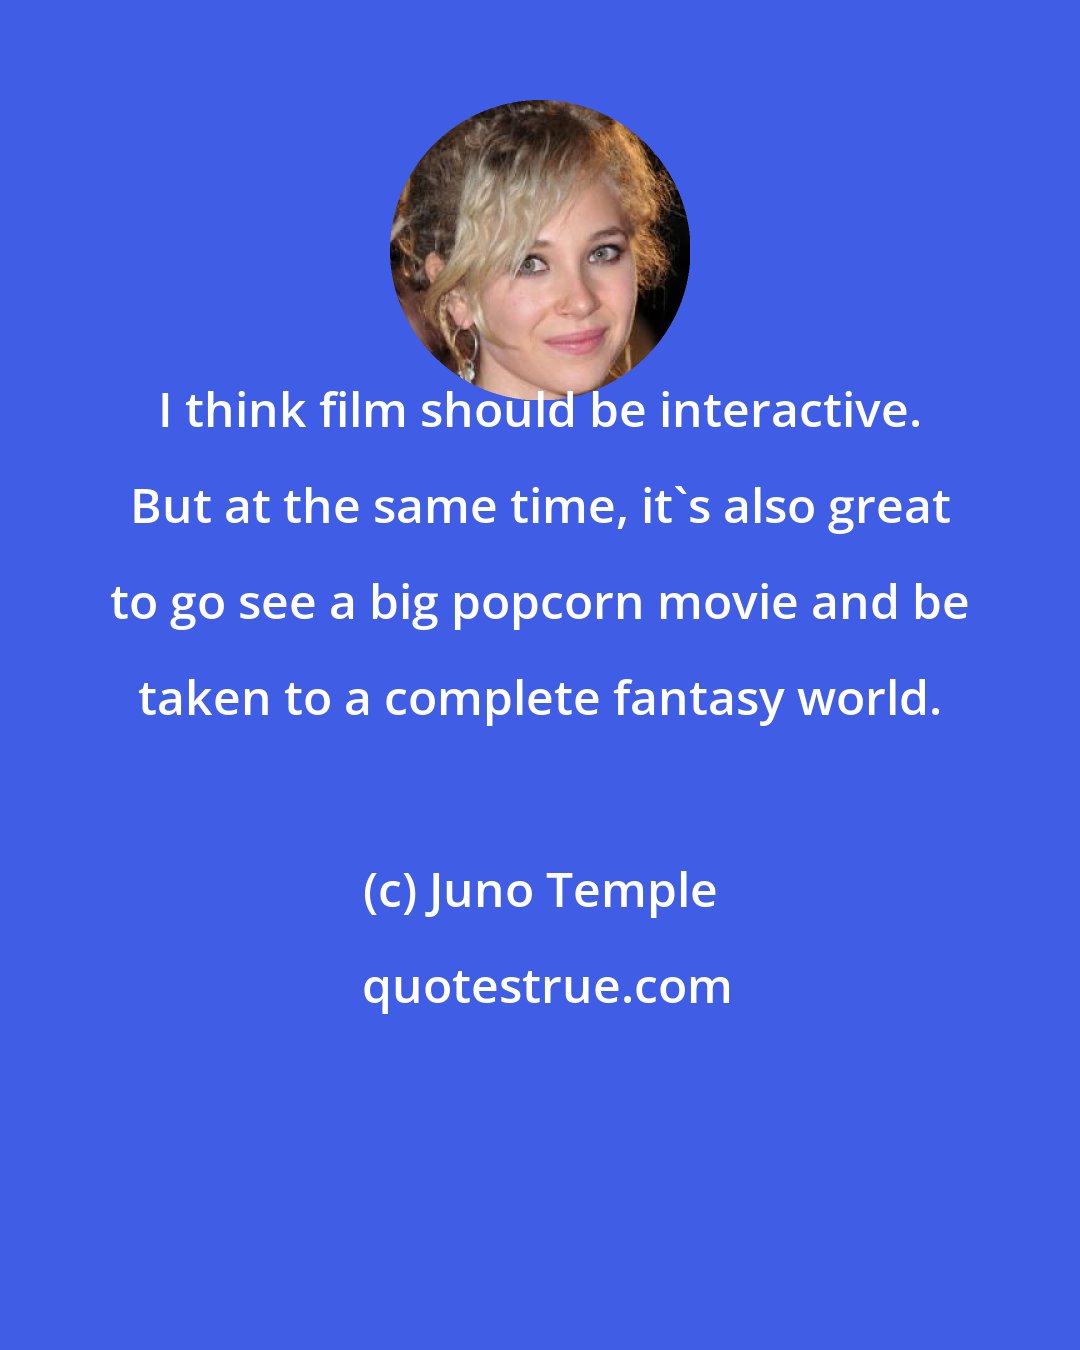 Juno Temple: I think film should be interactive. But at the same time, it's also great to go see a big popcorn movie and be taken to a complete fantasy world.